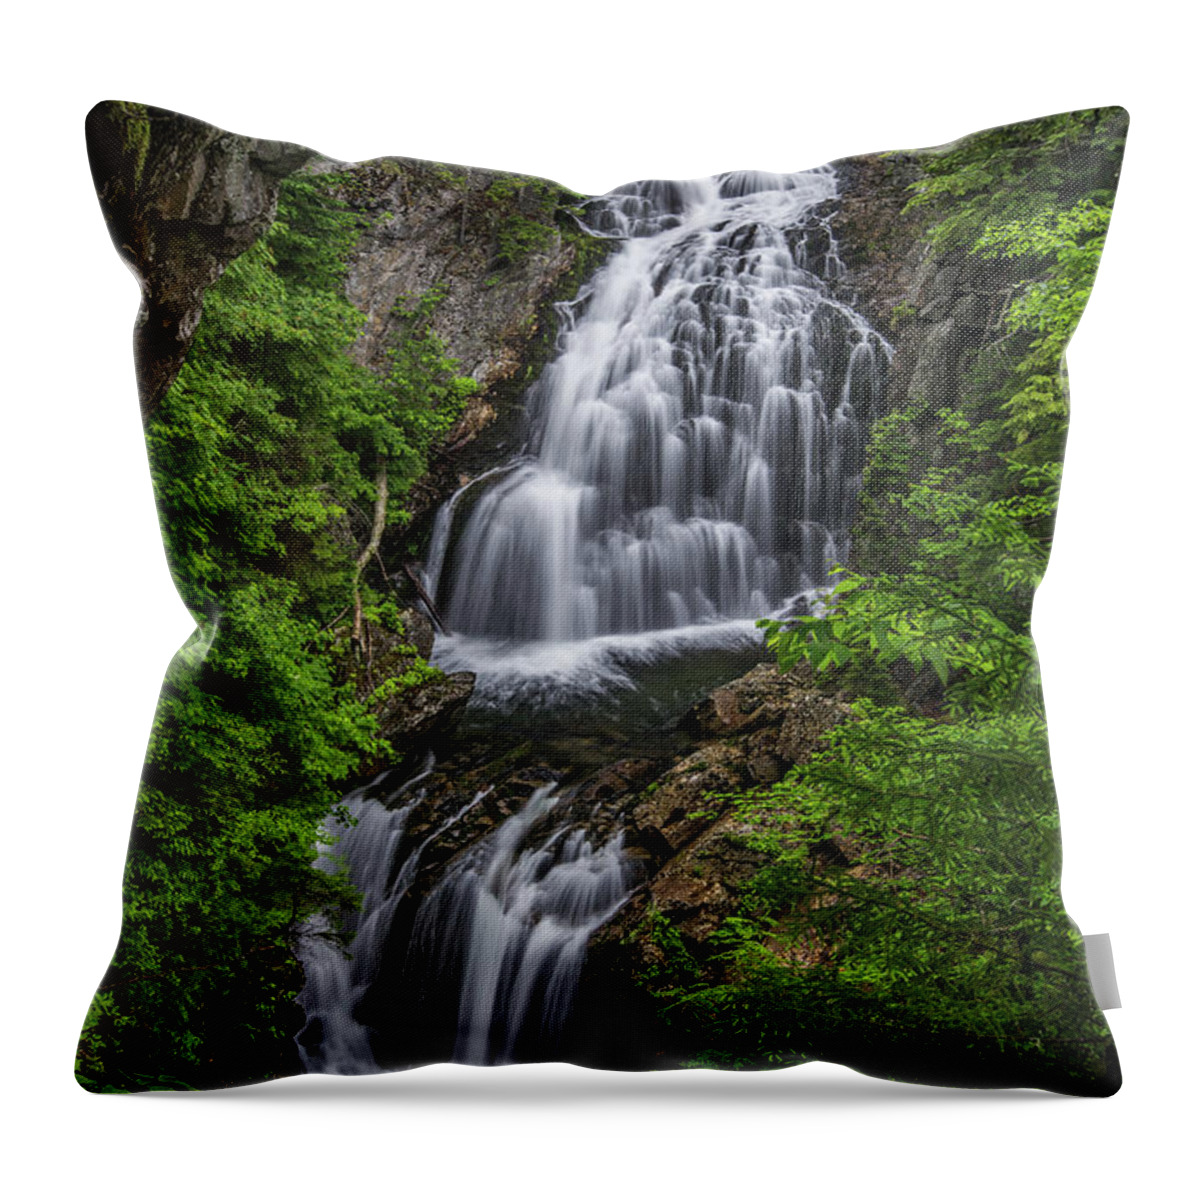 Crystal Throw Pillow featuring the photograph Crystal Cascade by White Mountain Images